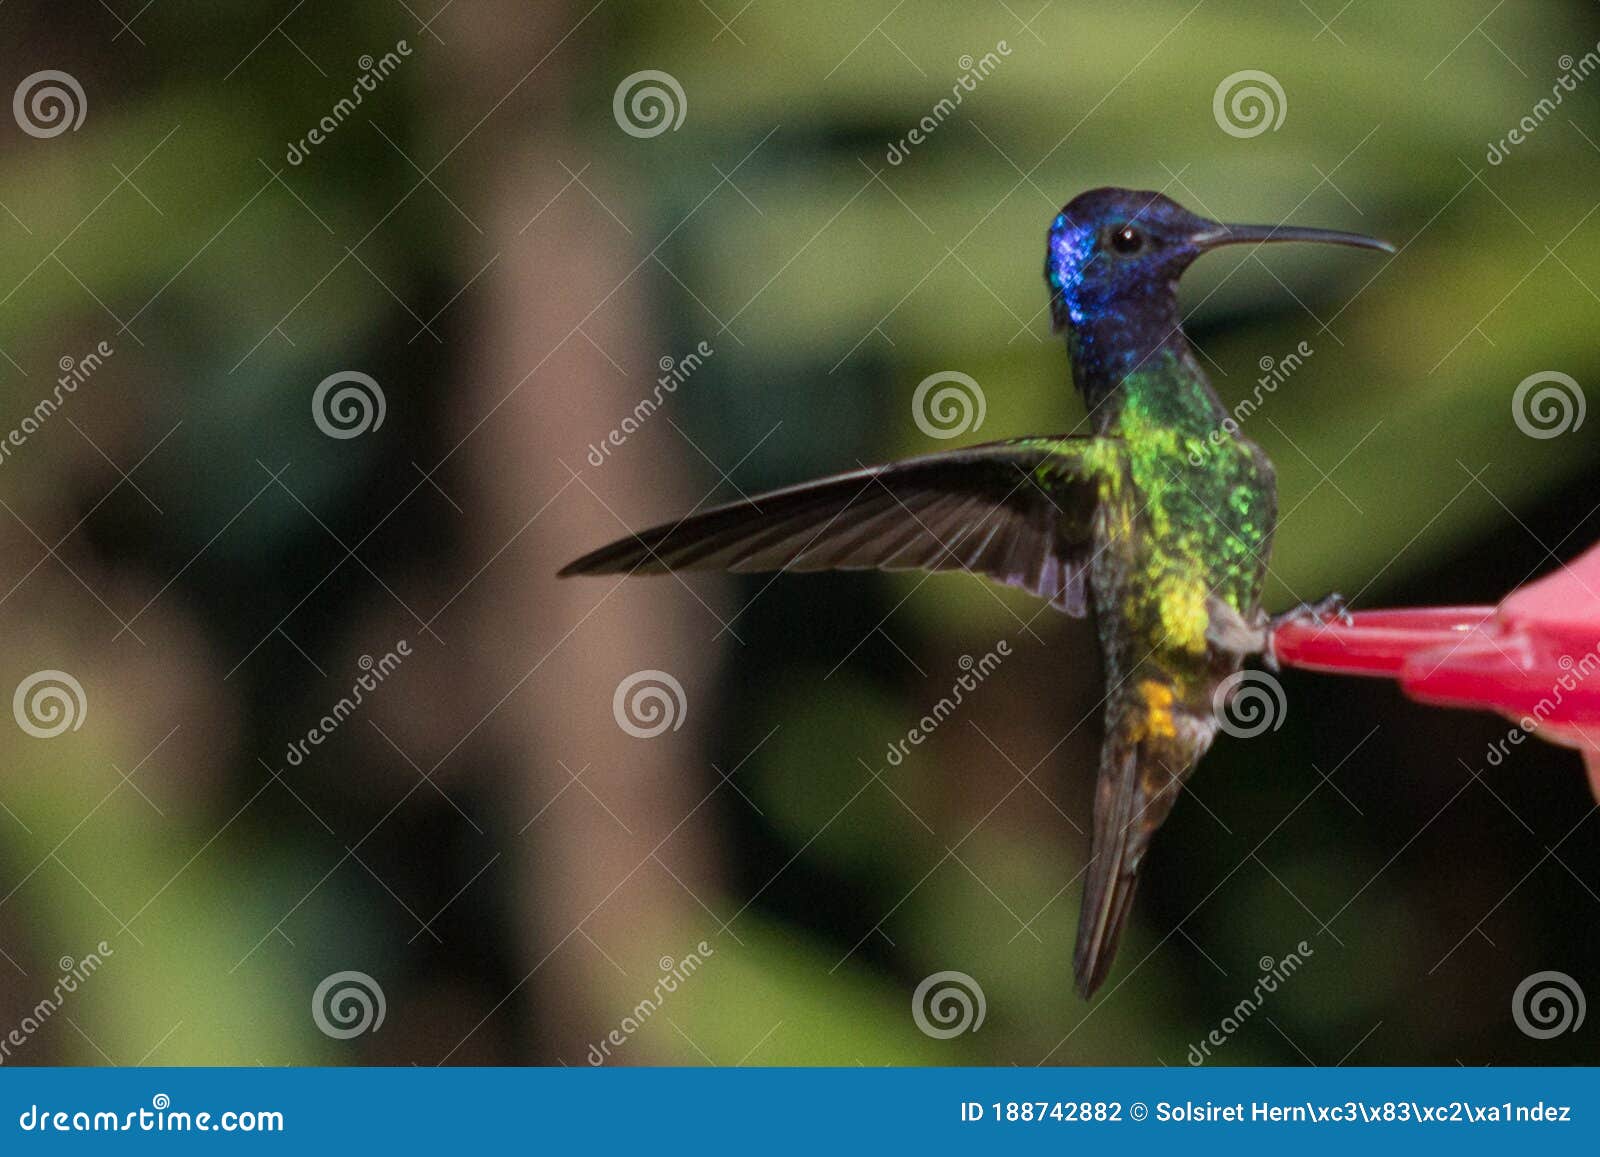 the plumage of the hummingbirds is generally green and they have blue or violet spots in some areas of their body.